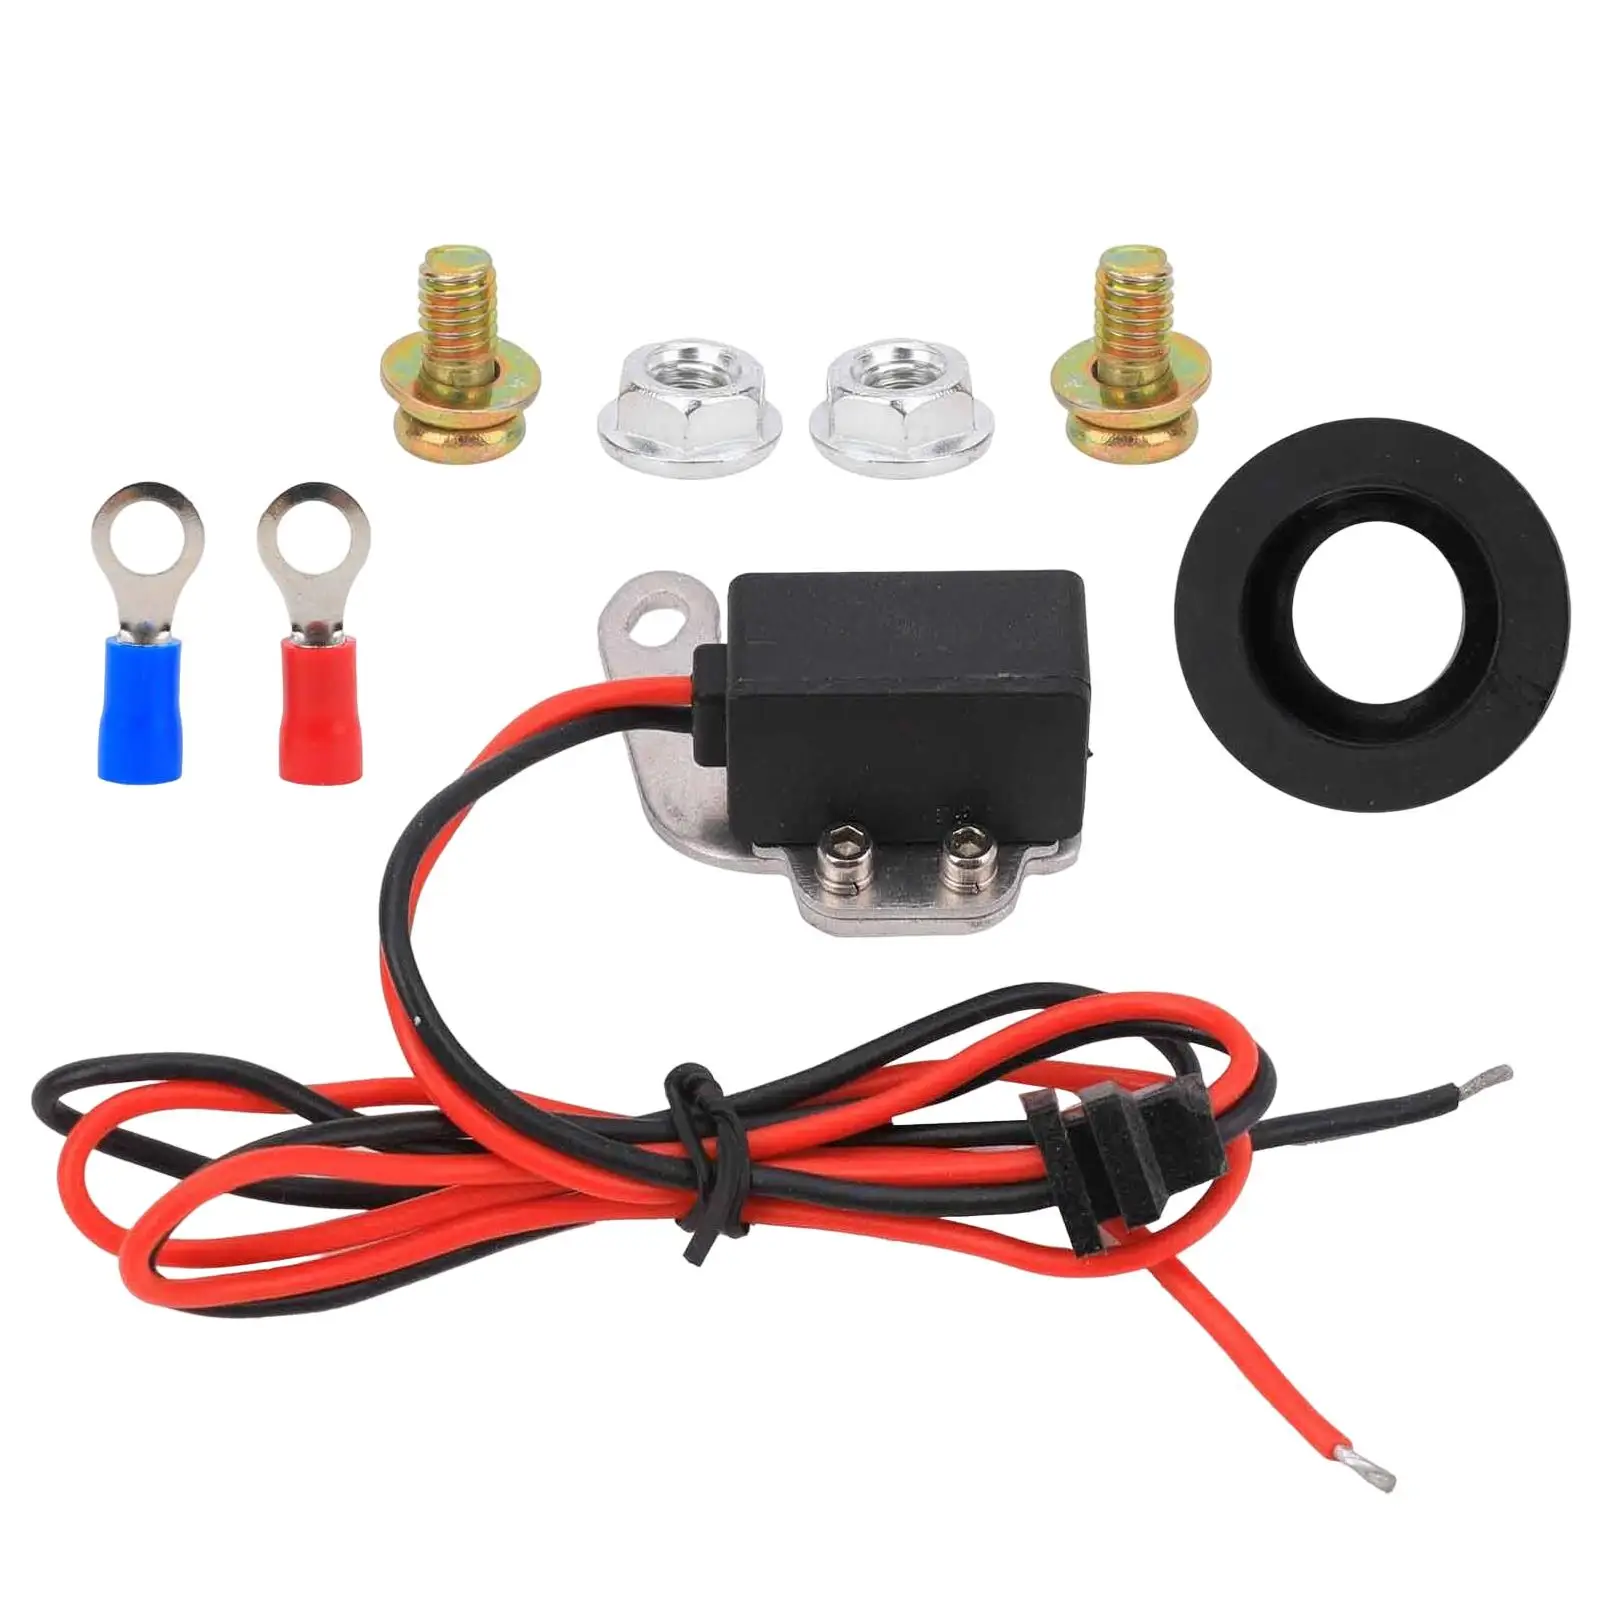 1281 Replaces Ignition Points to Electronic Conversion Kit for Ford V8